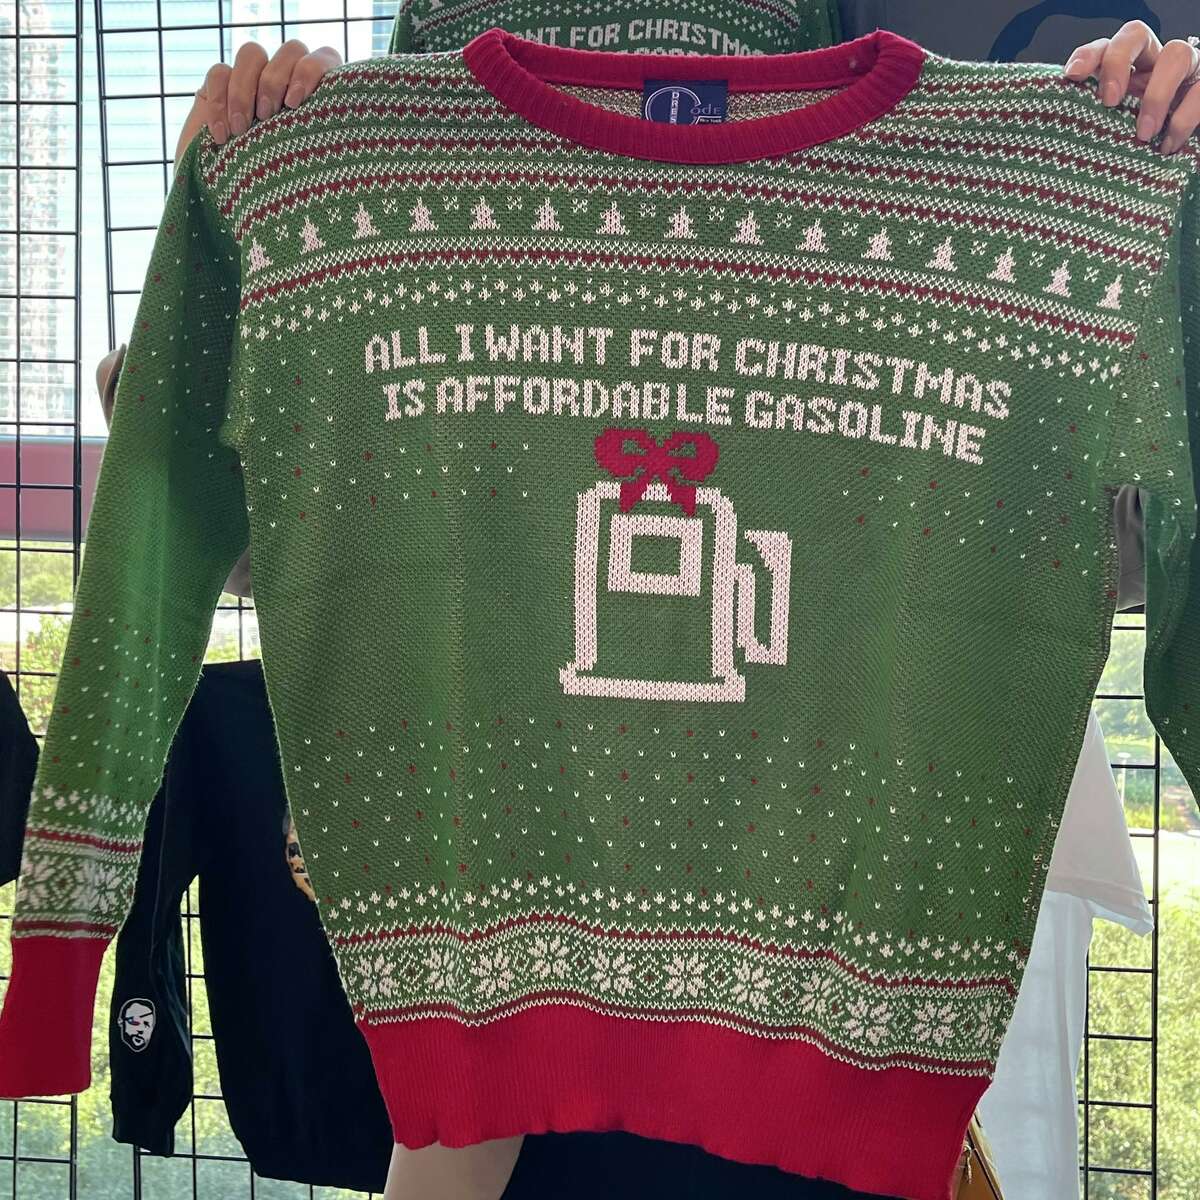 A knitted sweater reading "All I want for Christmas is affordable gasoline" sat among the merchandise being sold at Rep. Dan Crenshaw's third annual youth summit in downtown Houston. 